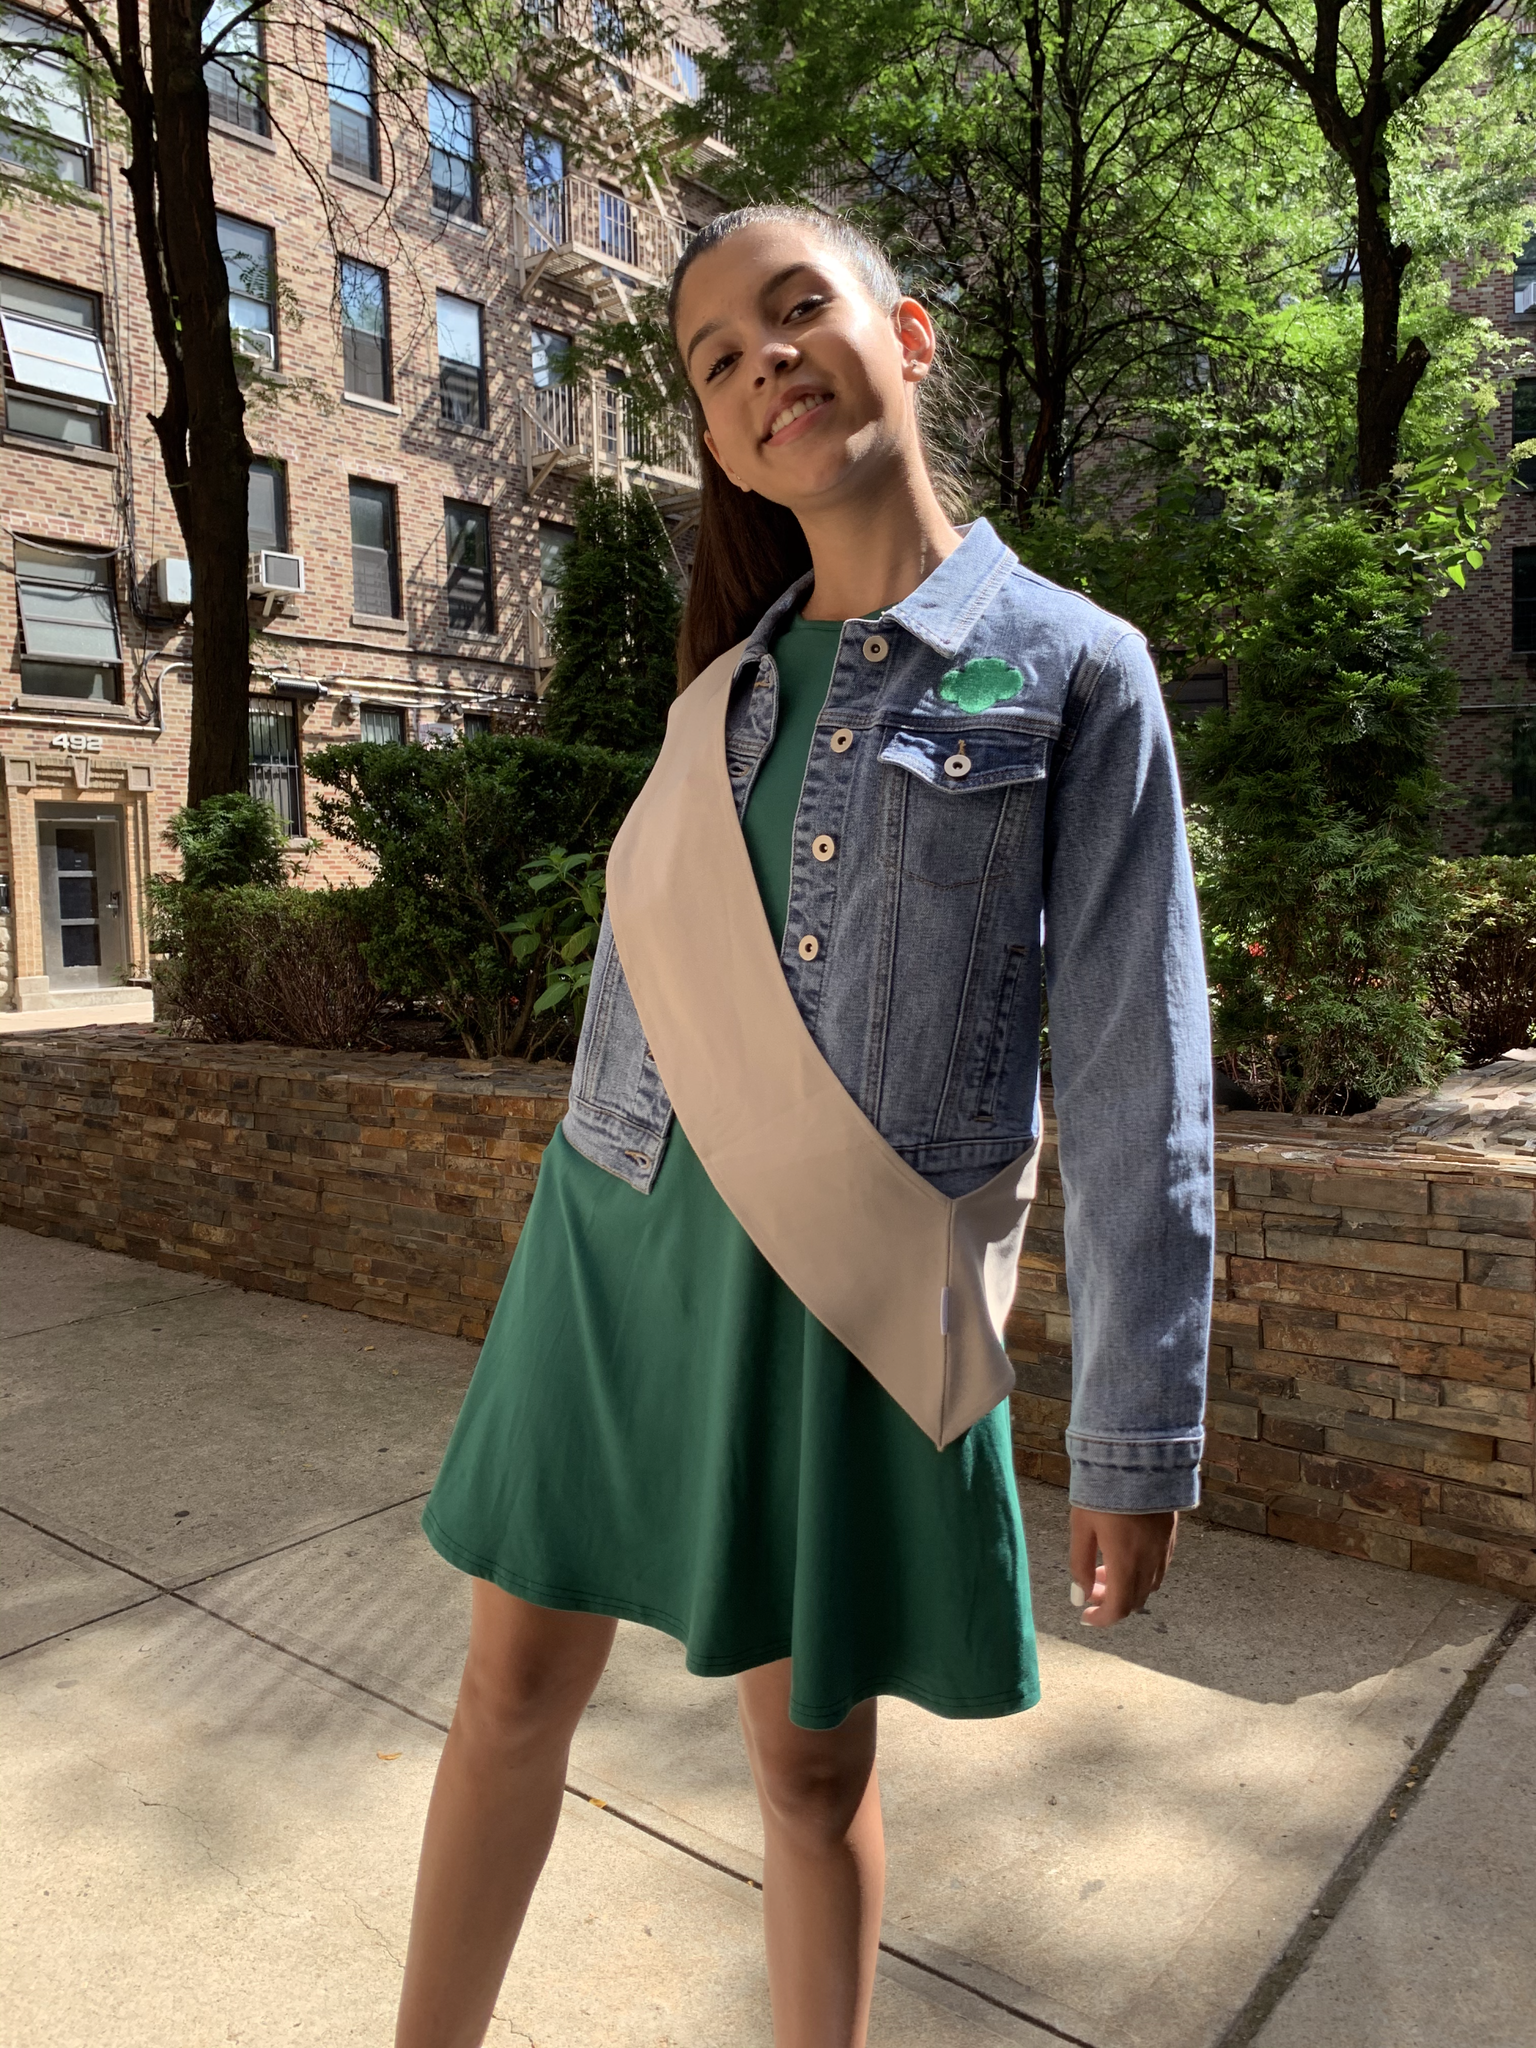 Young girl scout modeling new uniform outside on city sidewalk.